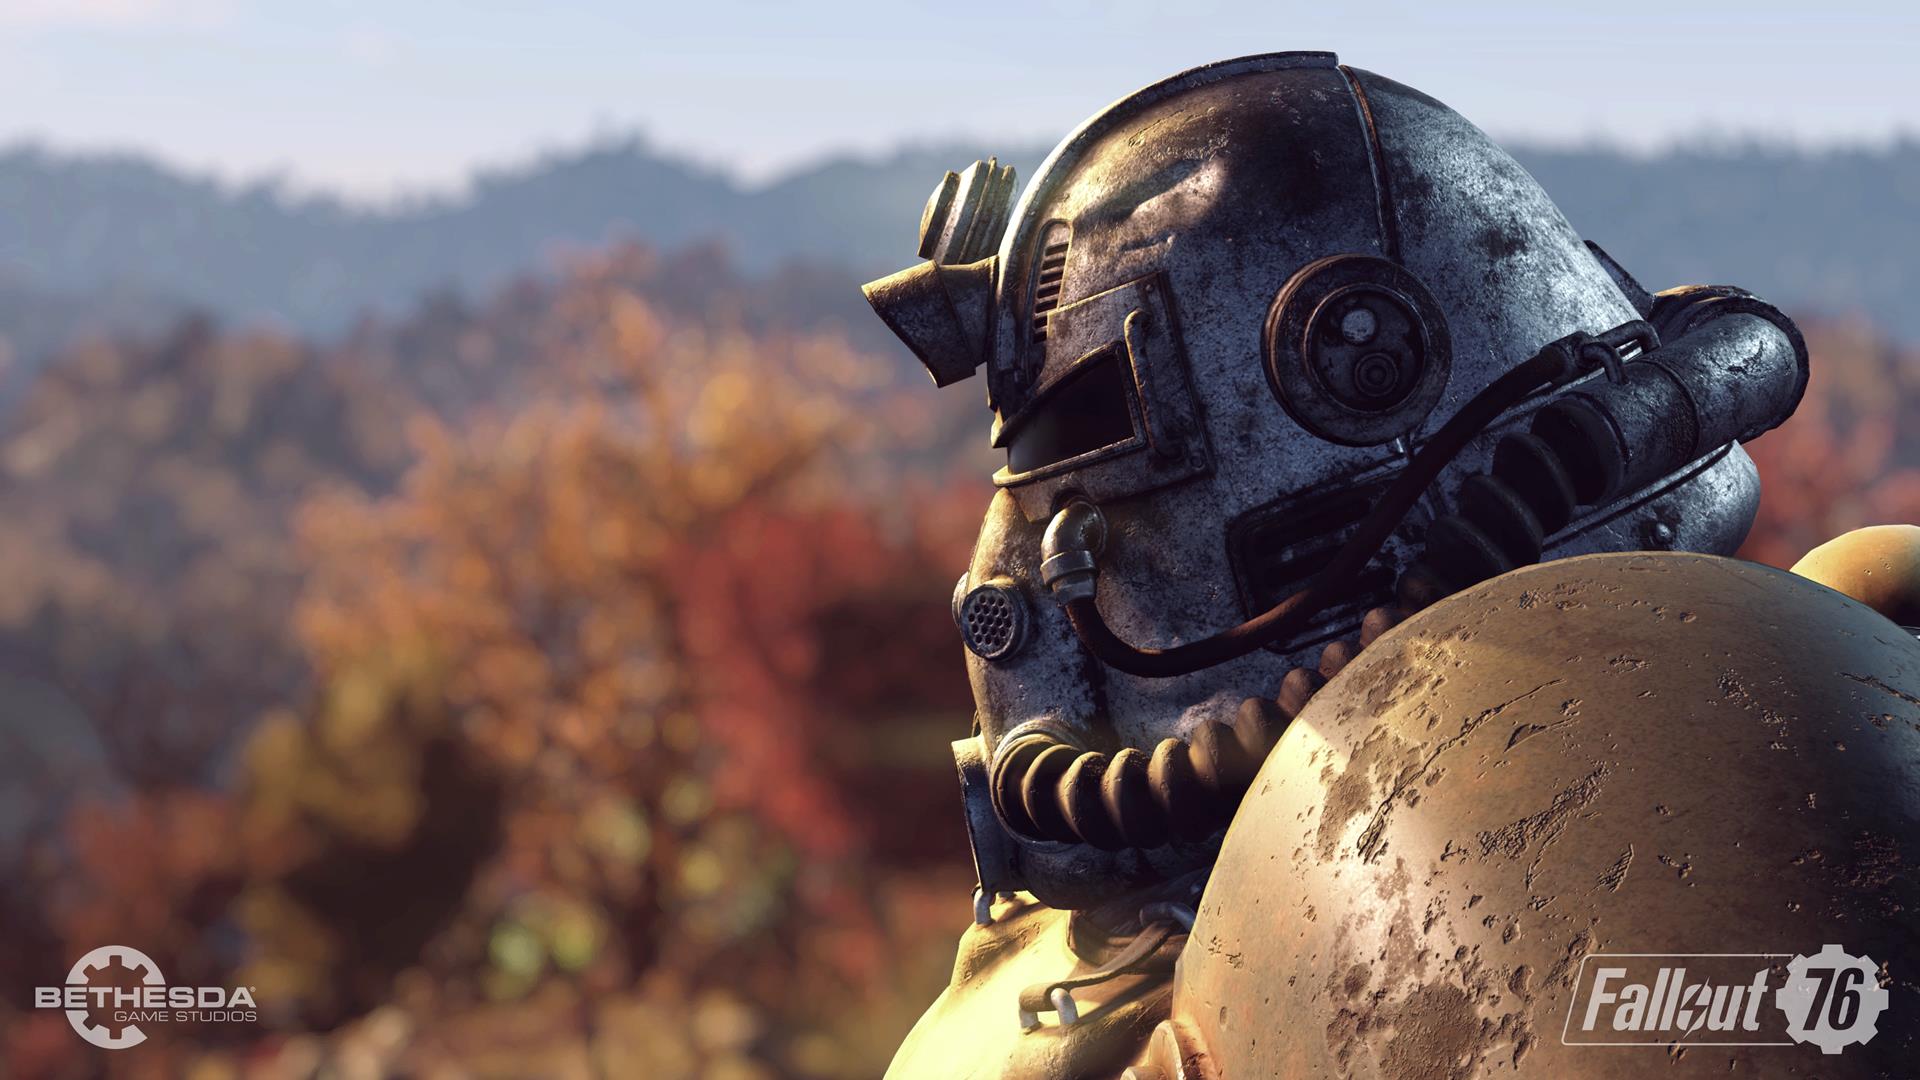 Image for Fallout 76 to get faction-based PvP, new quests, Vaults and more post launch